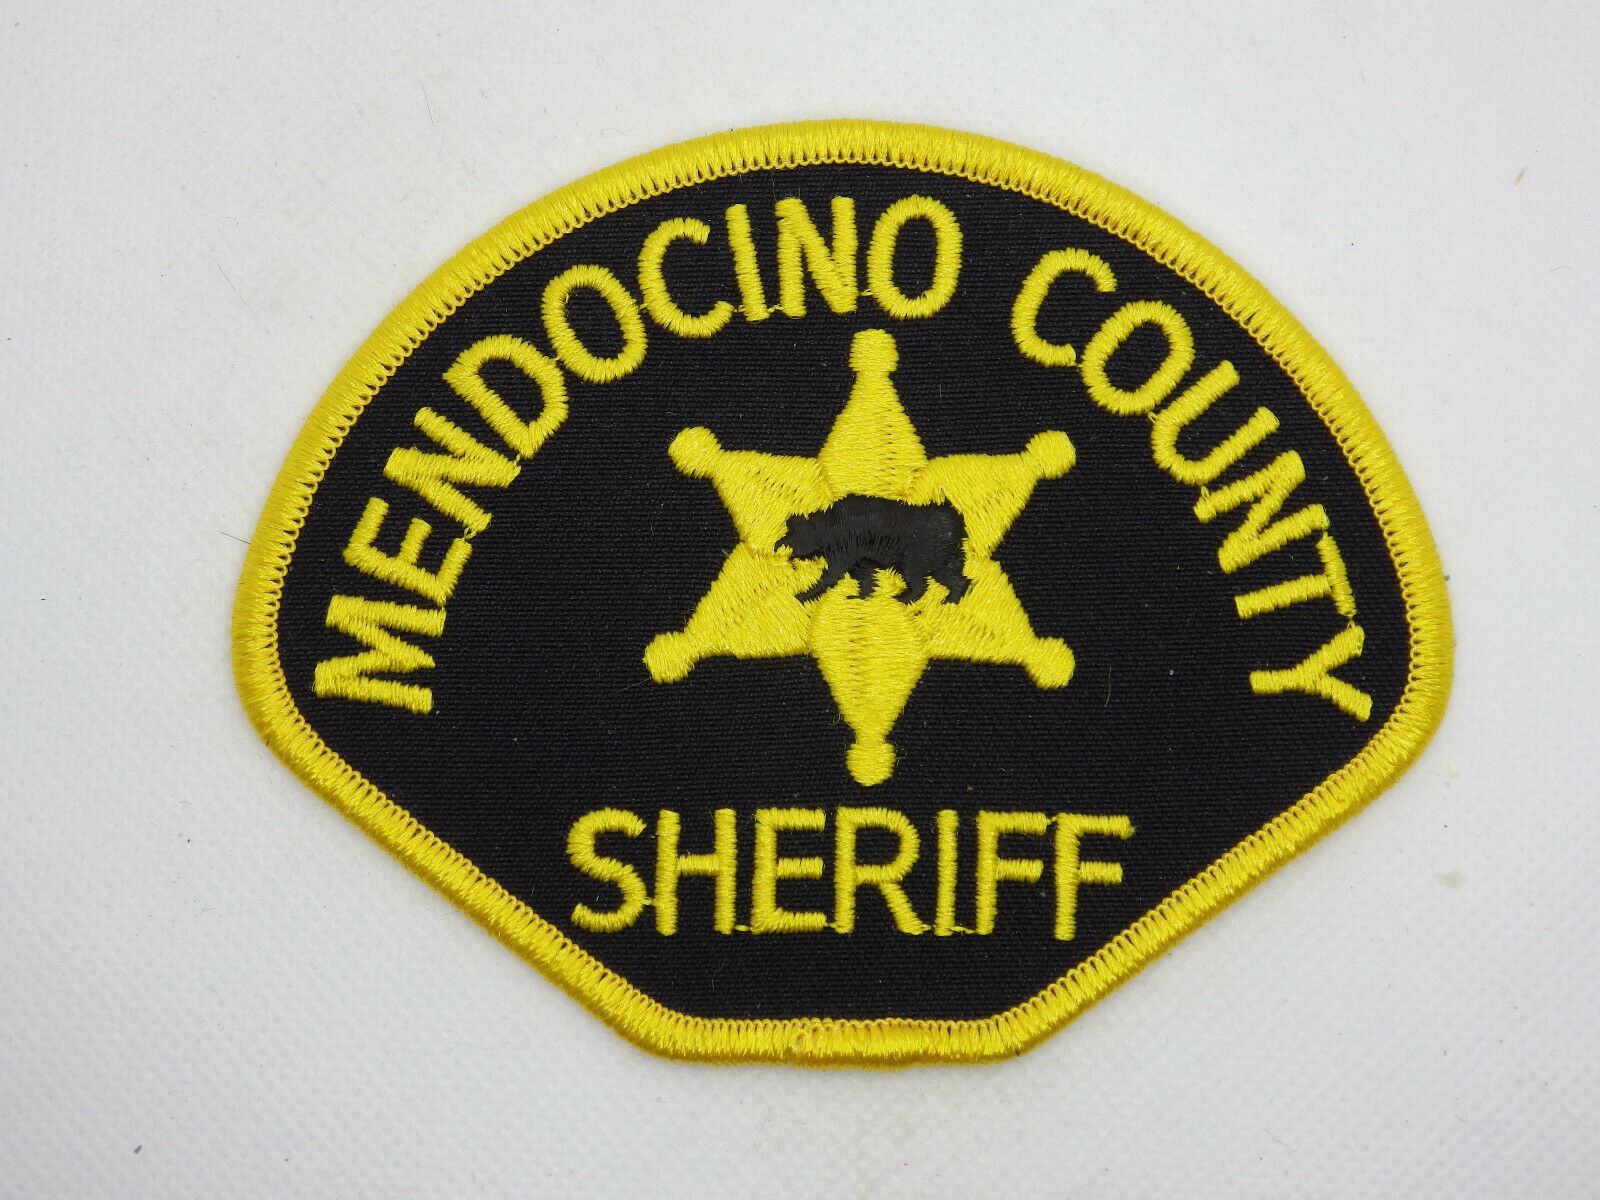 Mendocino County Sheriff Patch, California     Blk. Twill Bkgd. Variation 1